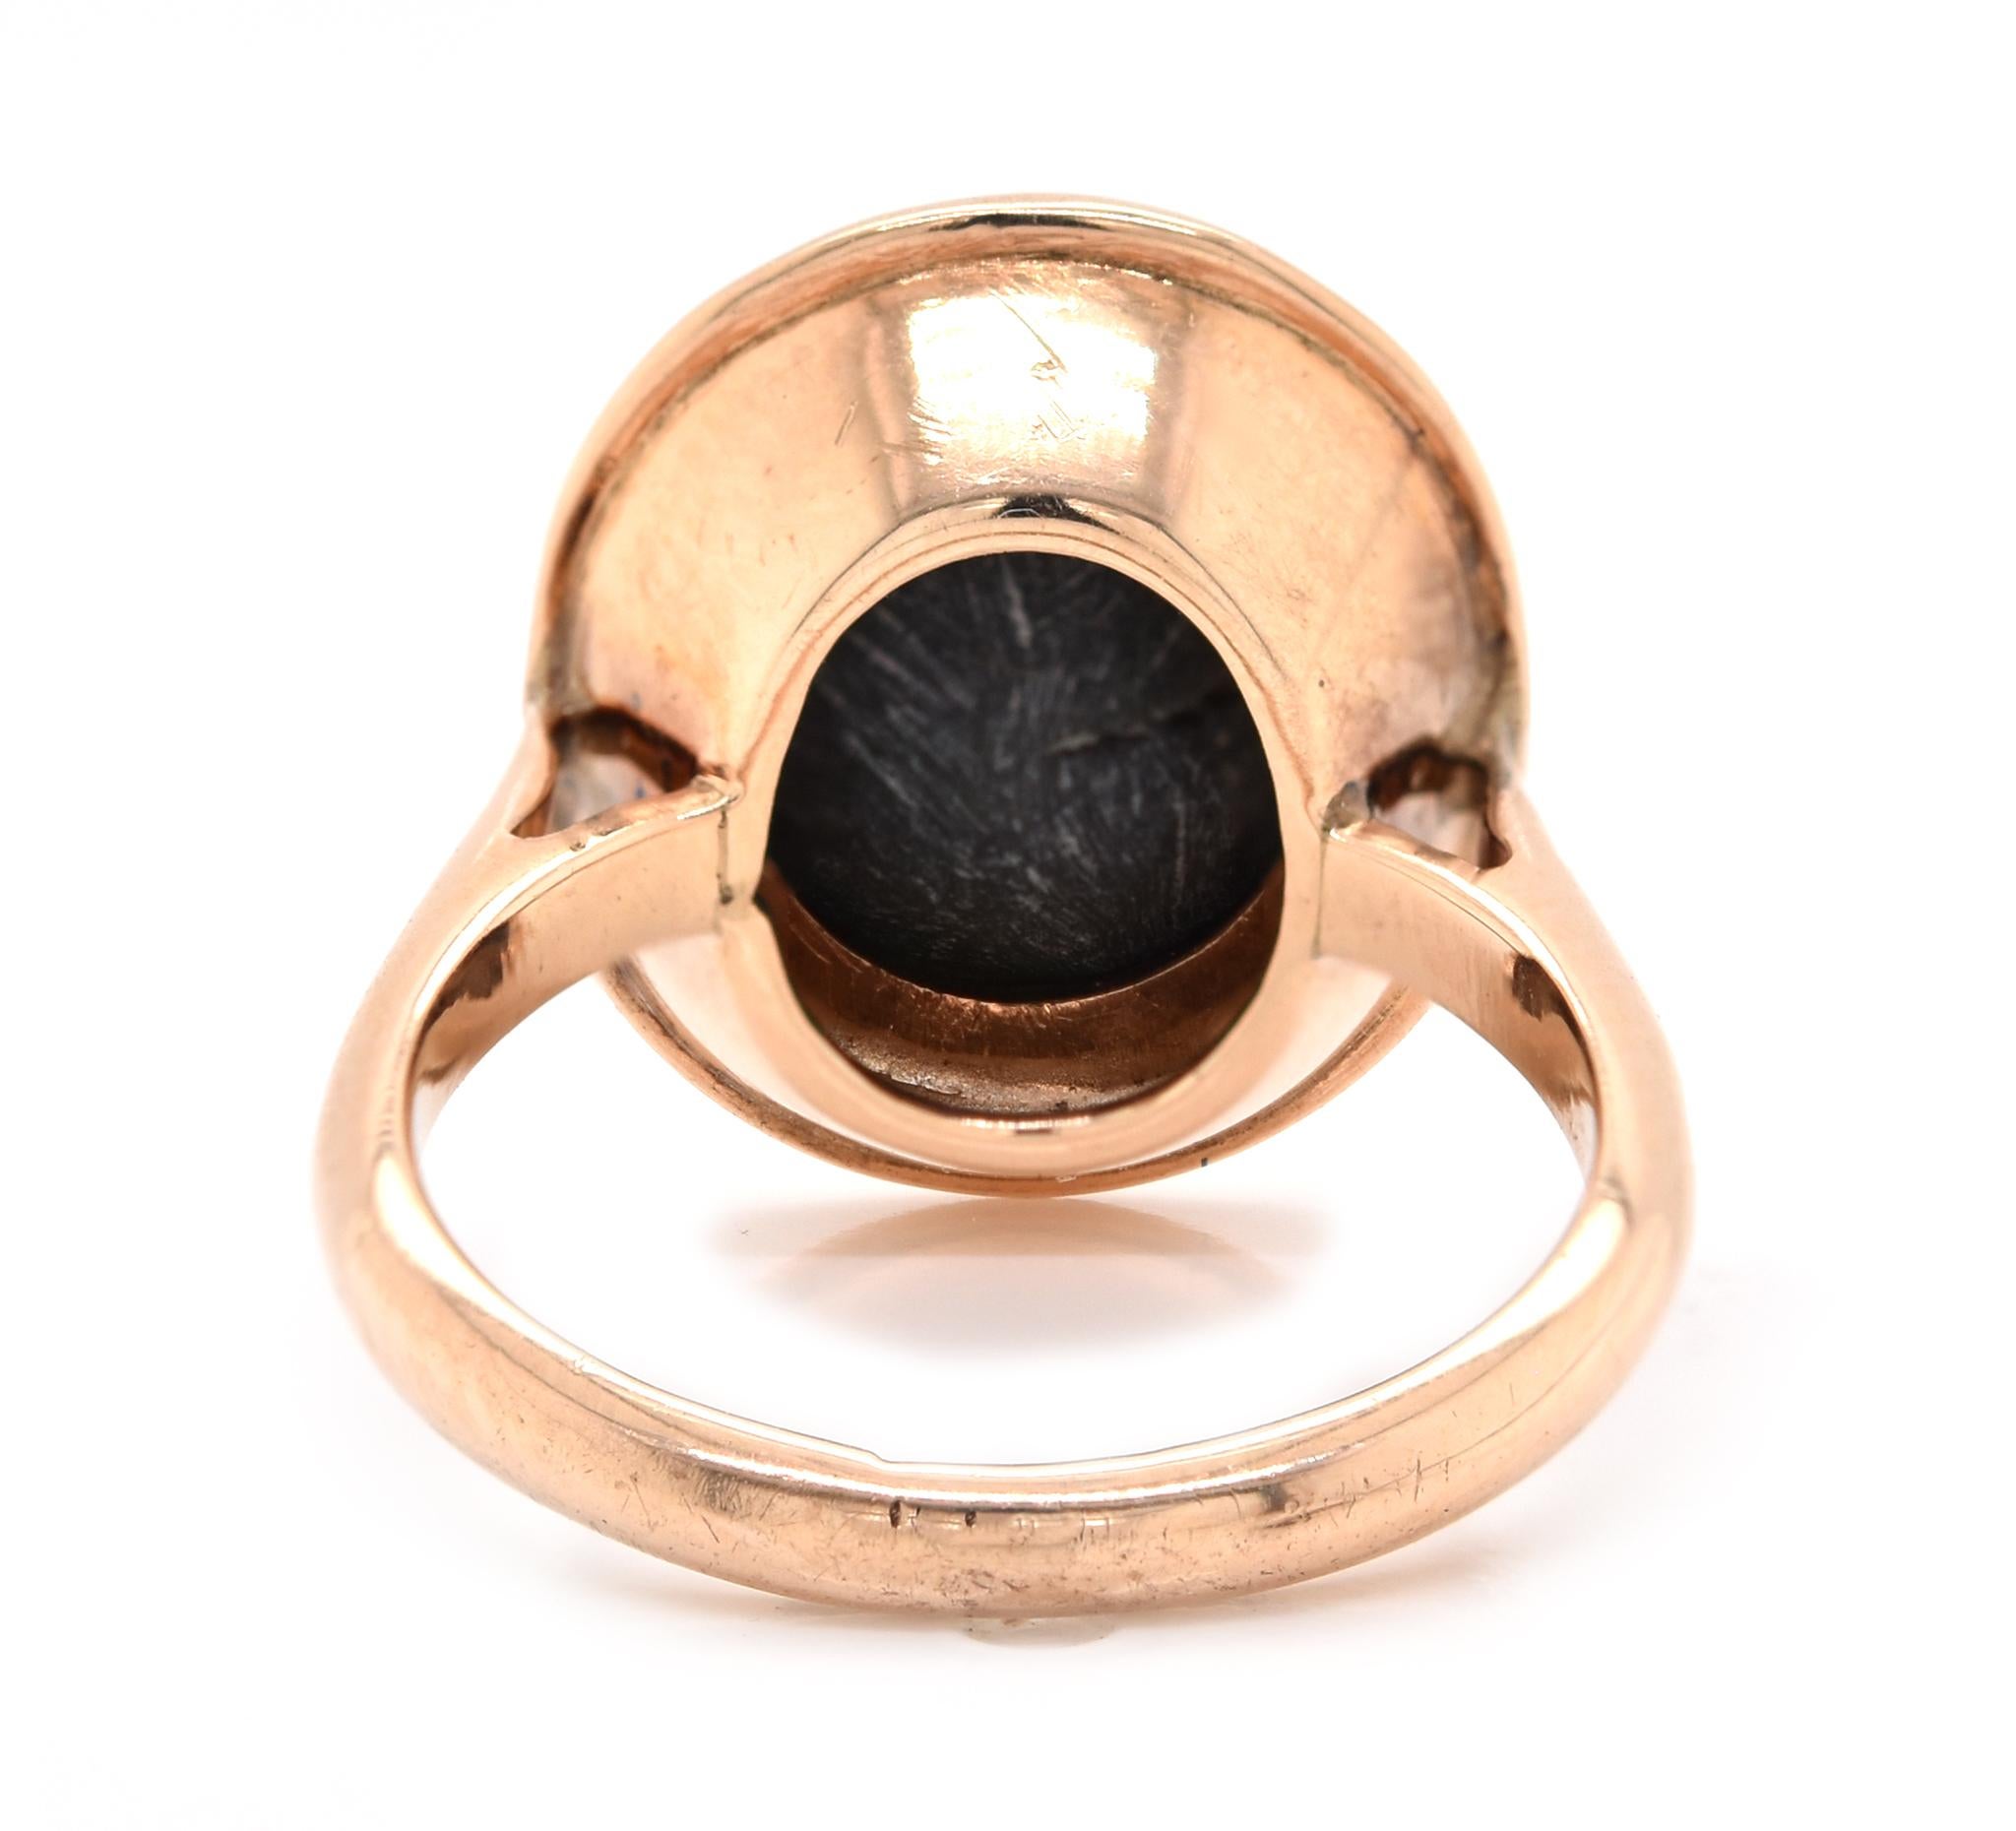 14 Karat Yellow Gold Vintage Black Star Sapphire Ring In Excellent Condition For Sale In Scottsdale, AZ